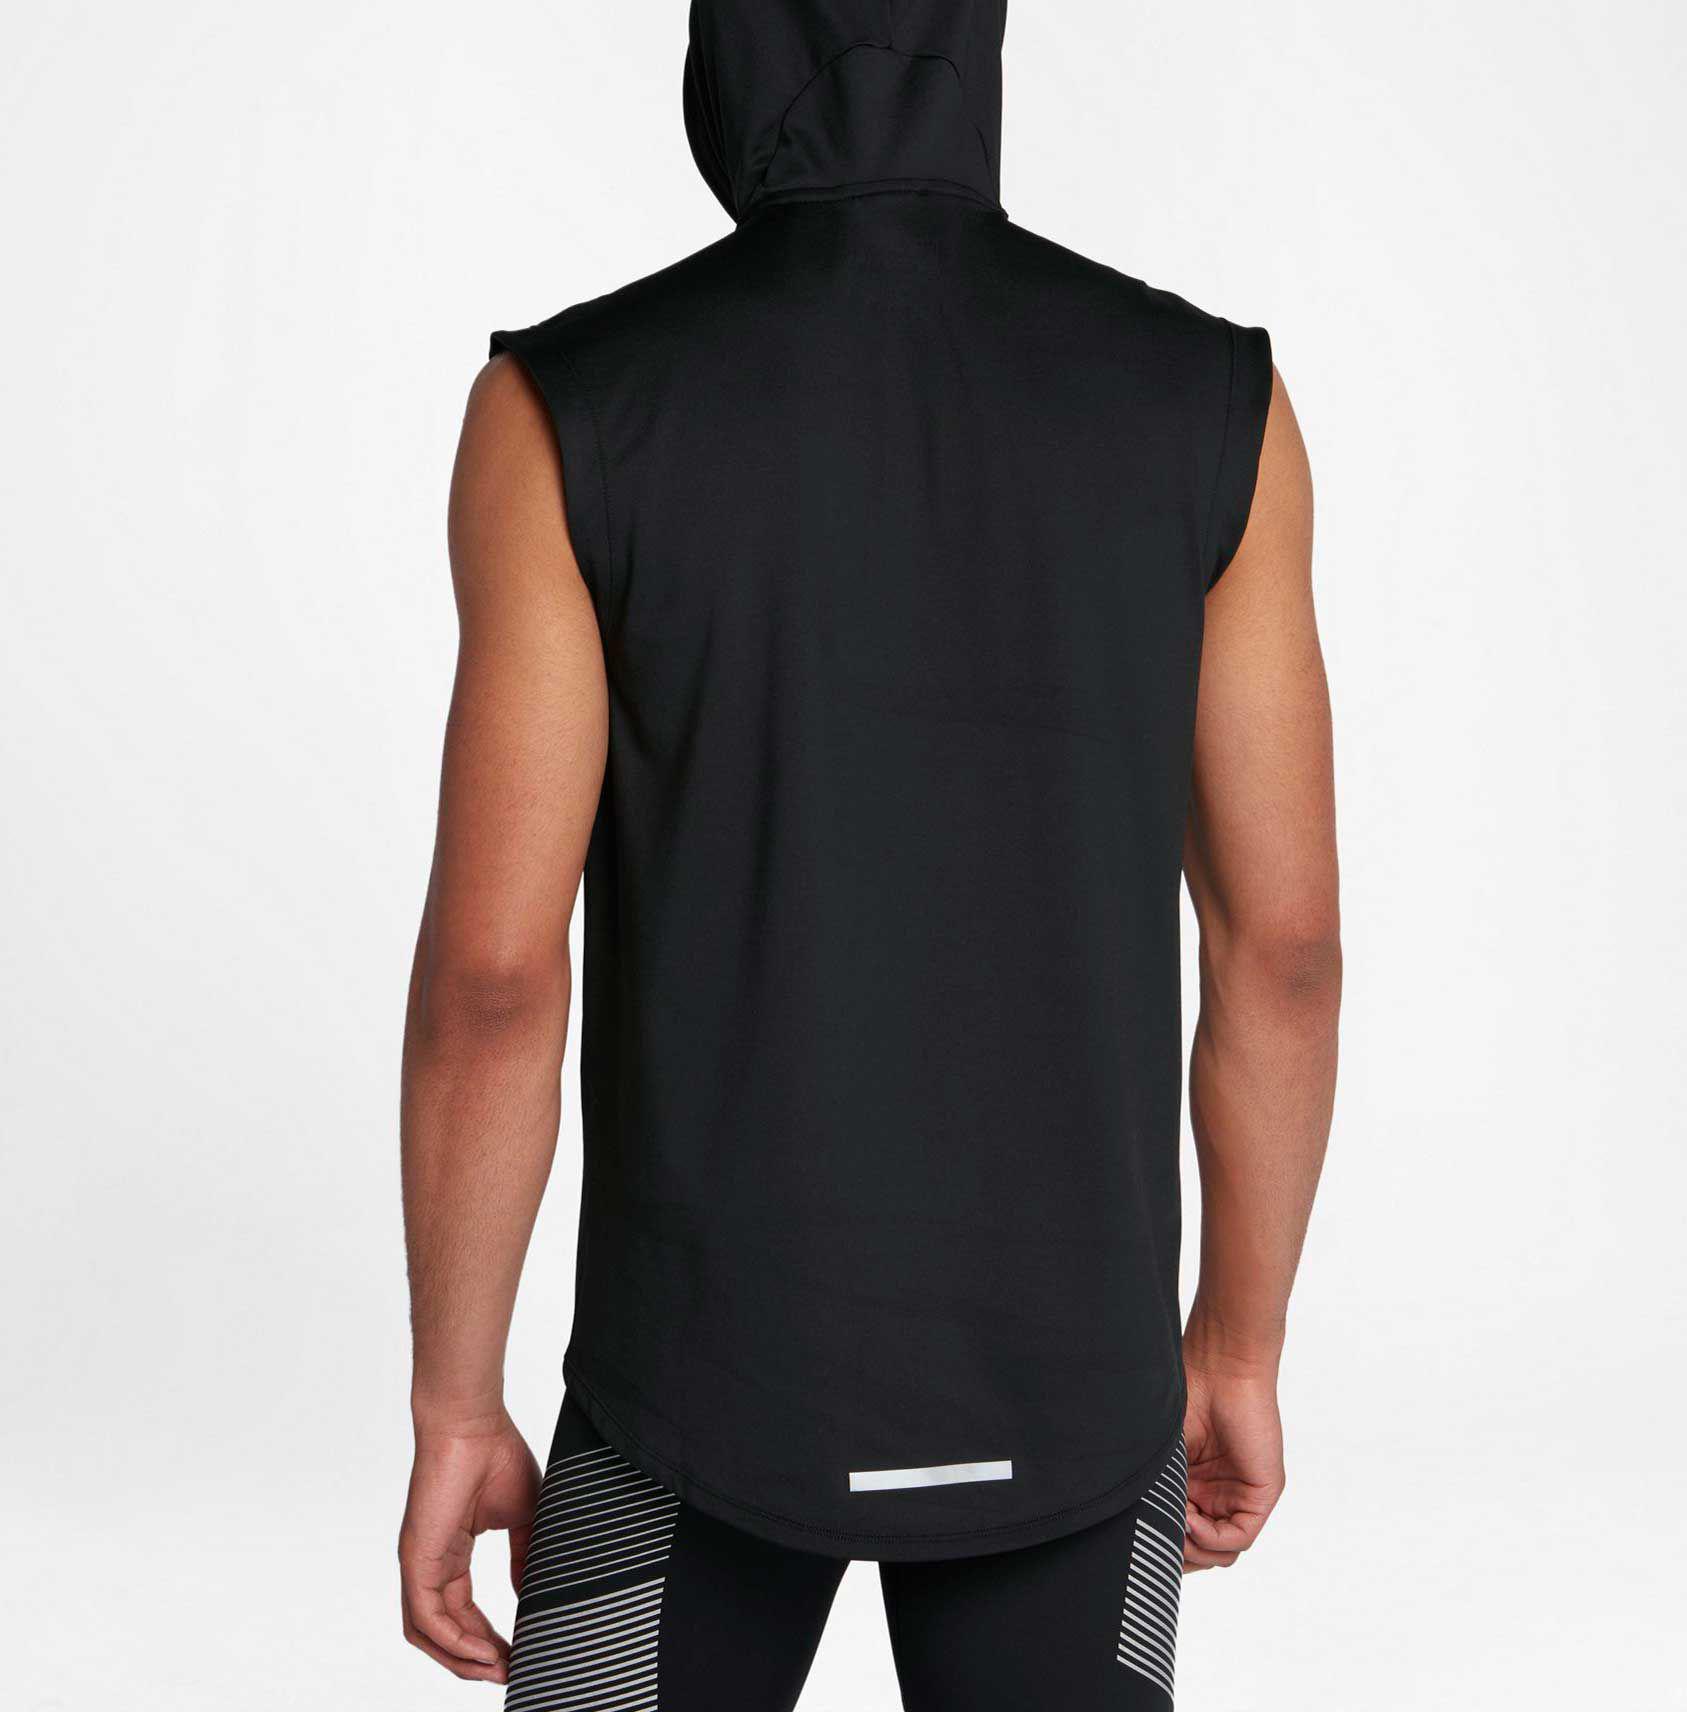 Nike Sleeveless Graphic Running Hoodie in Black/Anthracite (Black) for ...